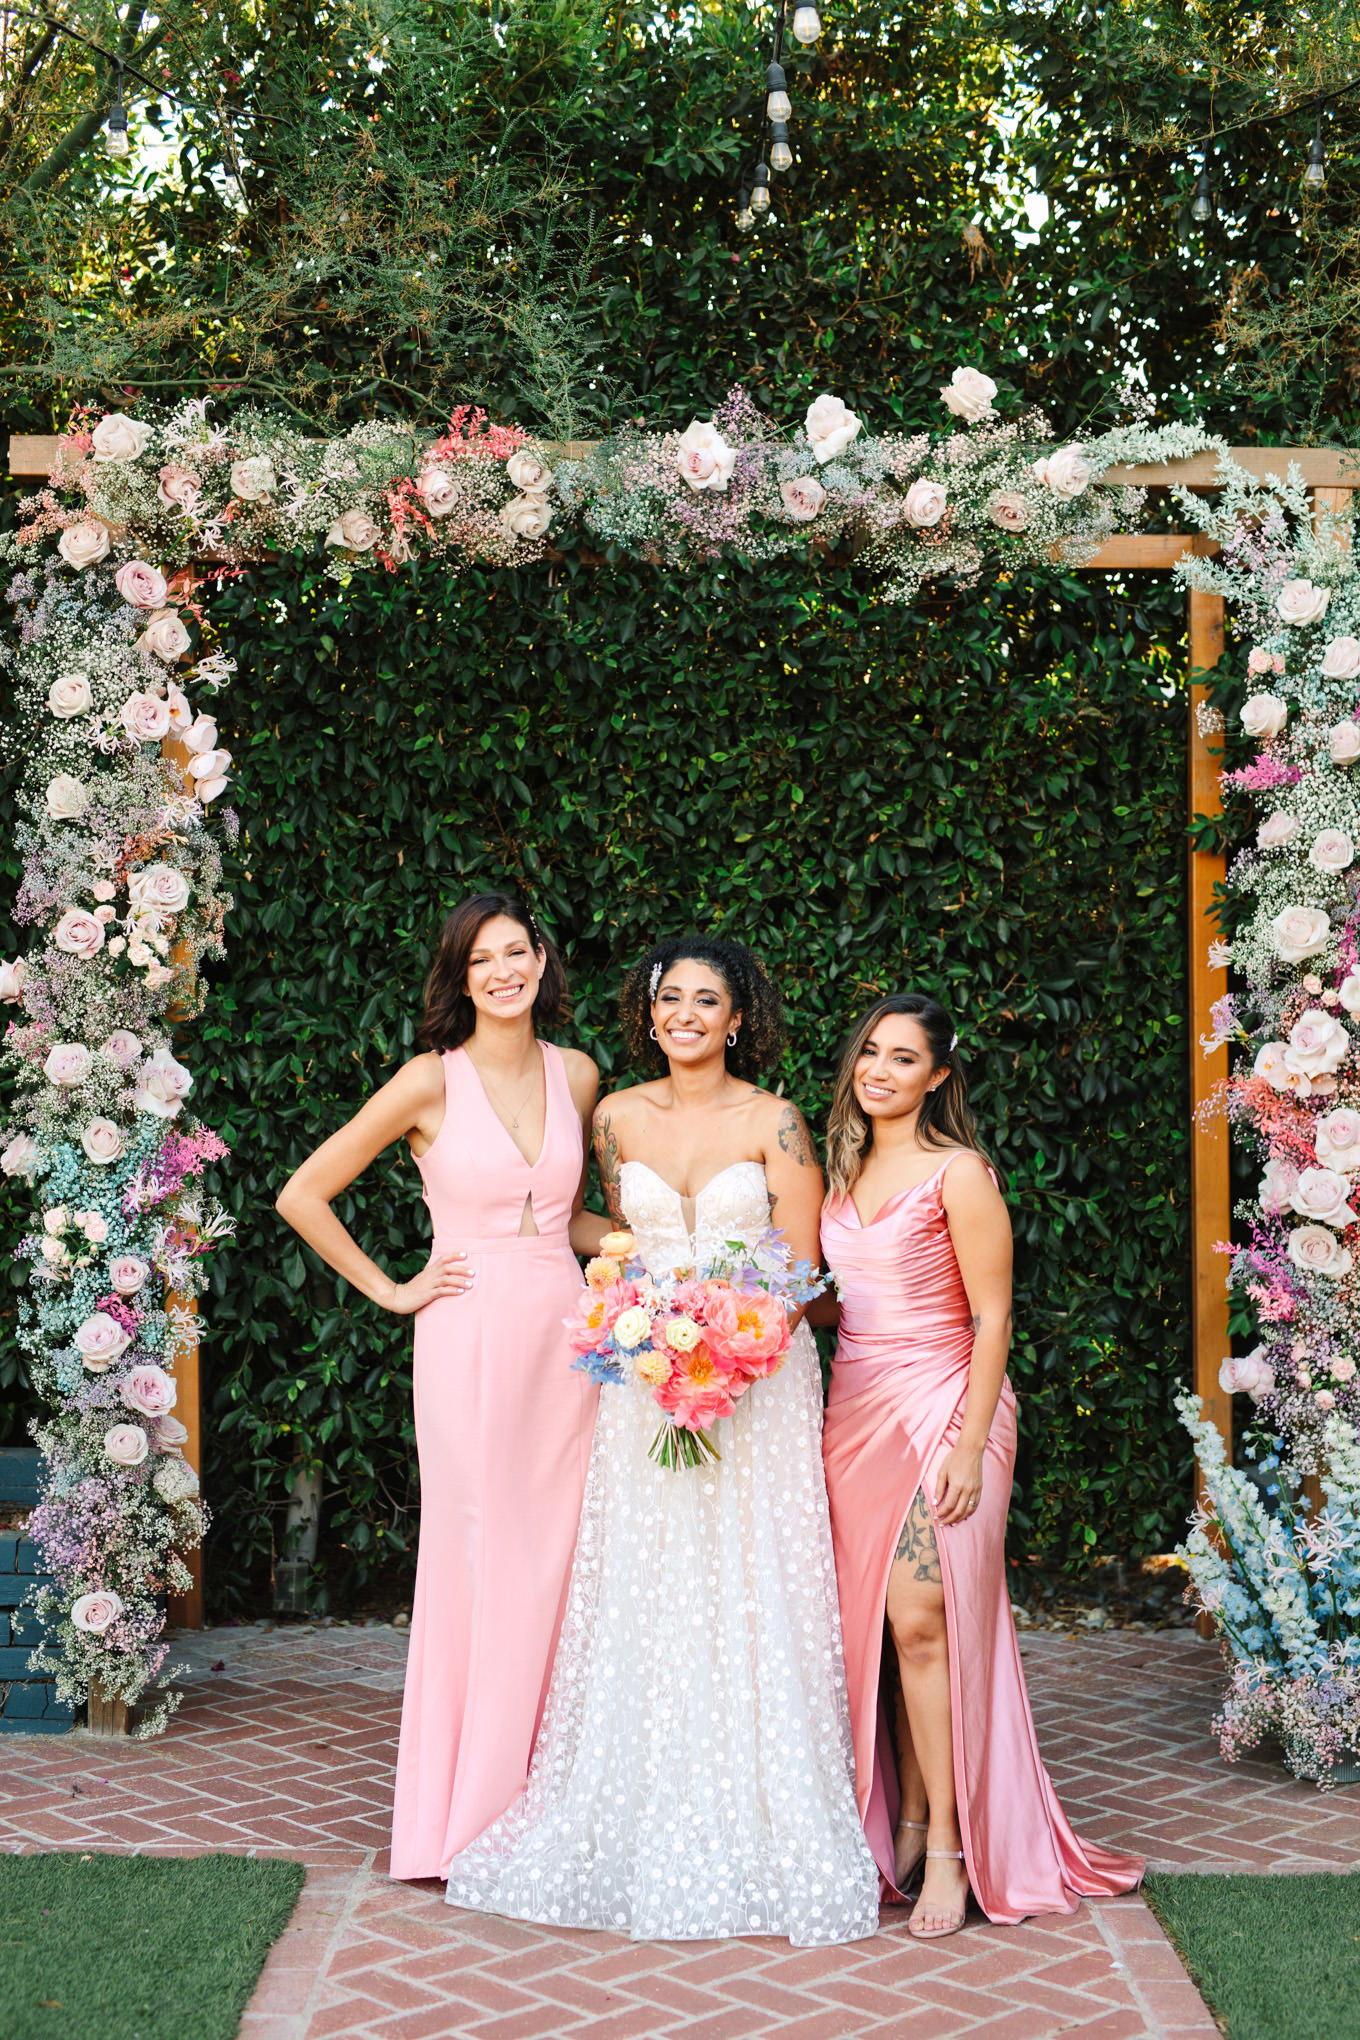 Bride with bridesmaids in light pink | Colorful pop-up micro wedding at The Ruby Street Los Angeles featured on Green Wedding Shoes | Colorful and elevated photography for fun-loving couples in Southern California | #colorfulwedding #popupwedding #weddingphotography #microwedding Source: Mary Costa Photography | Los Angeles